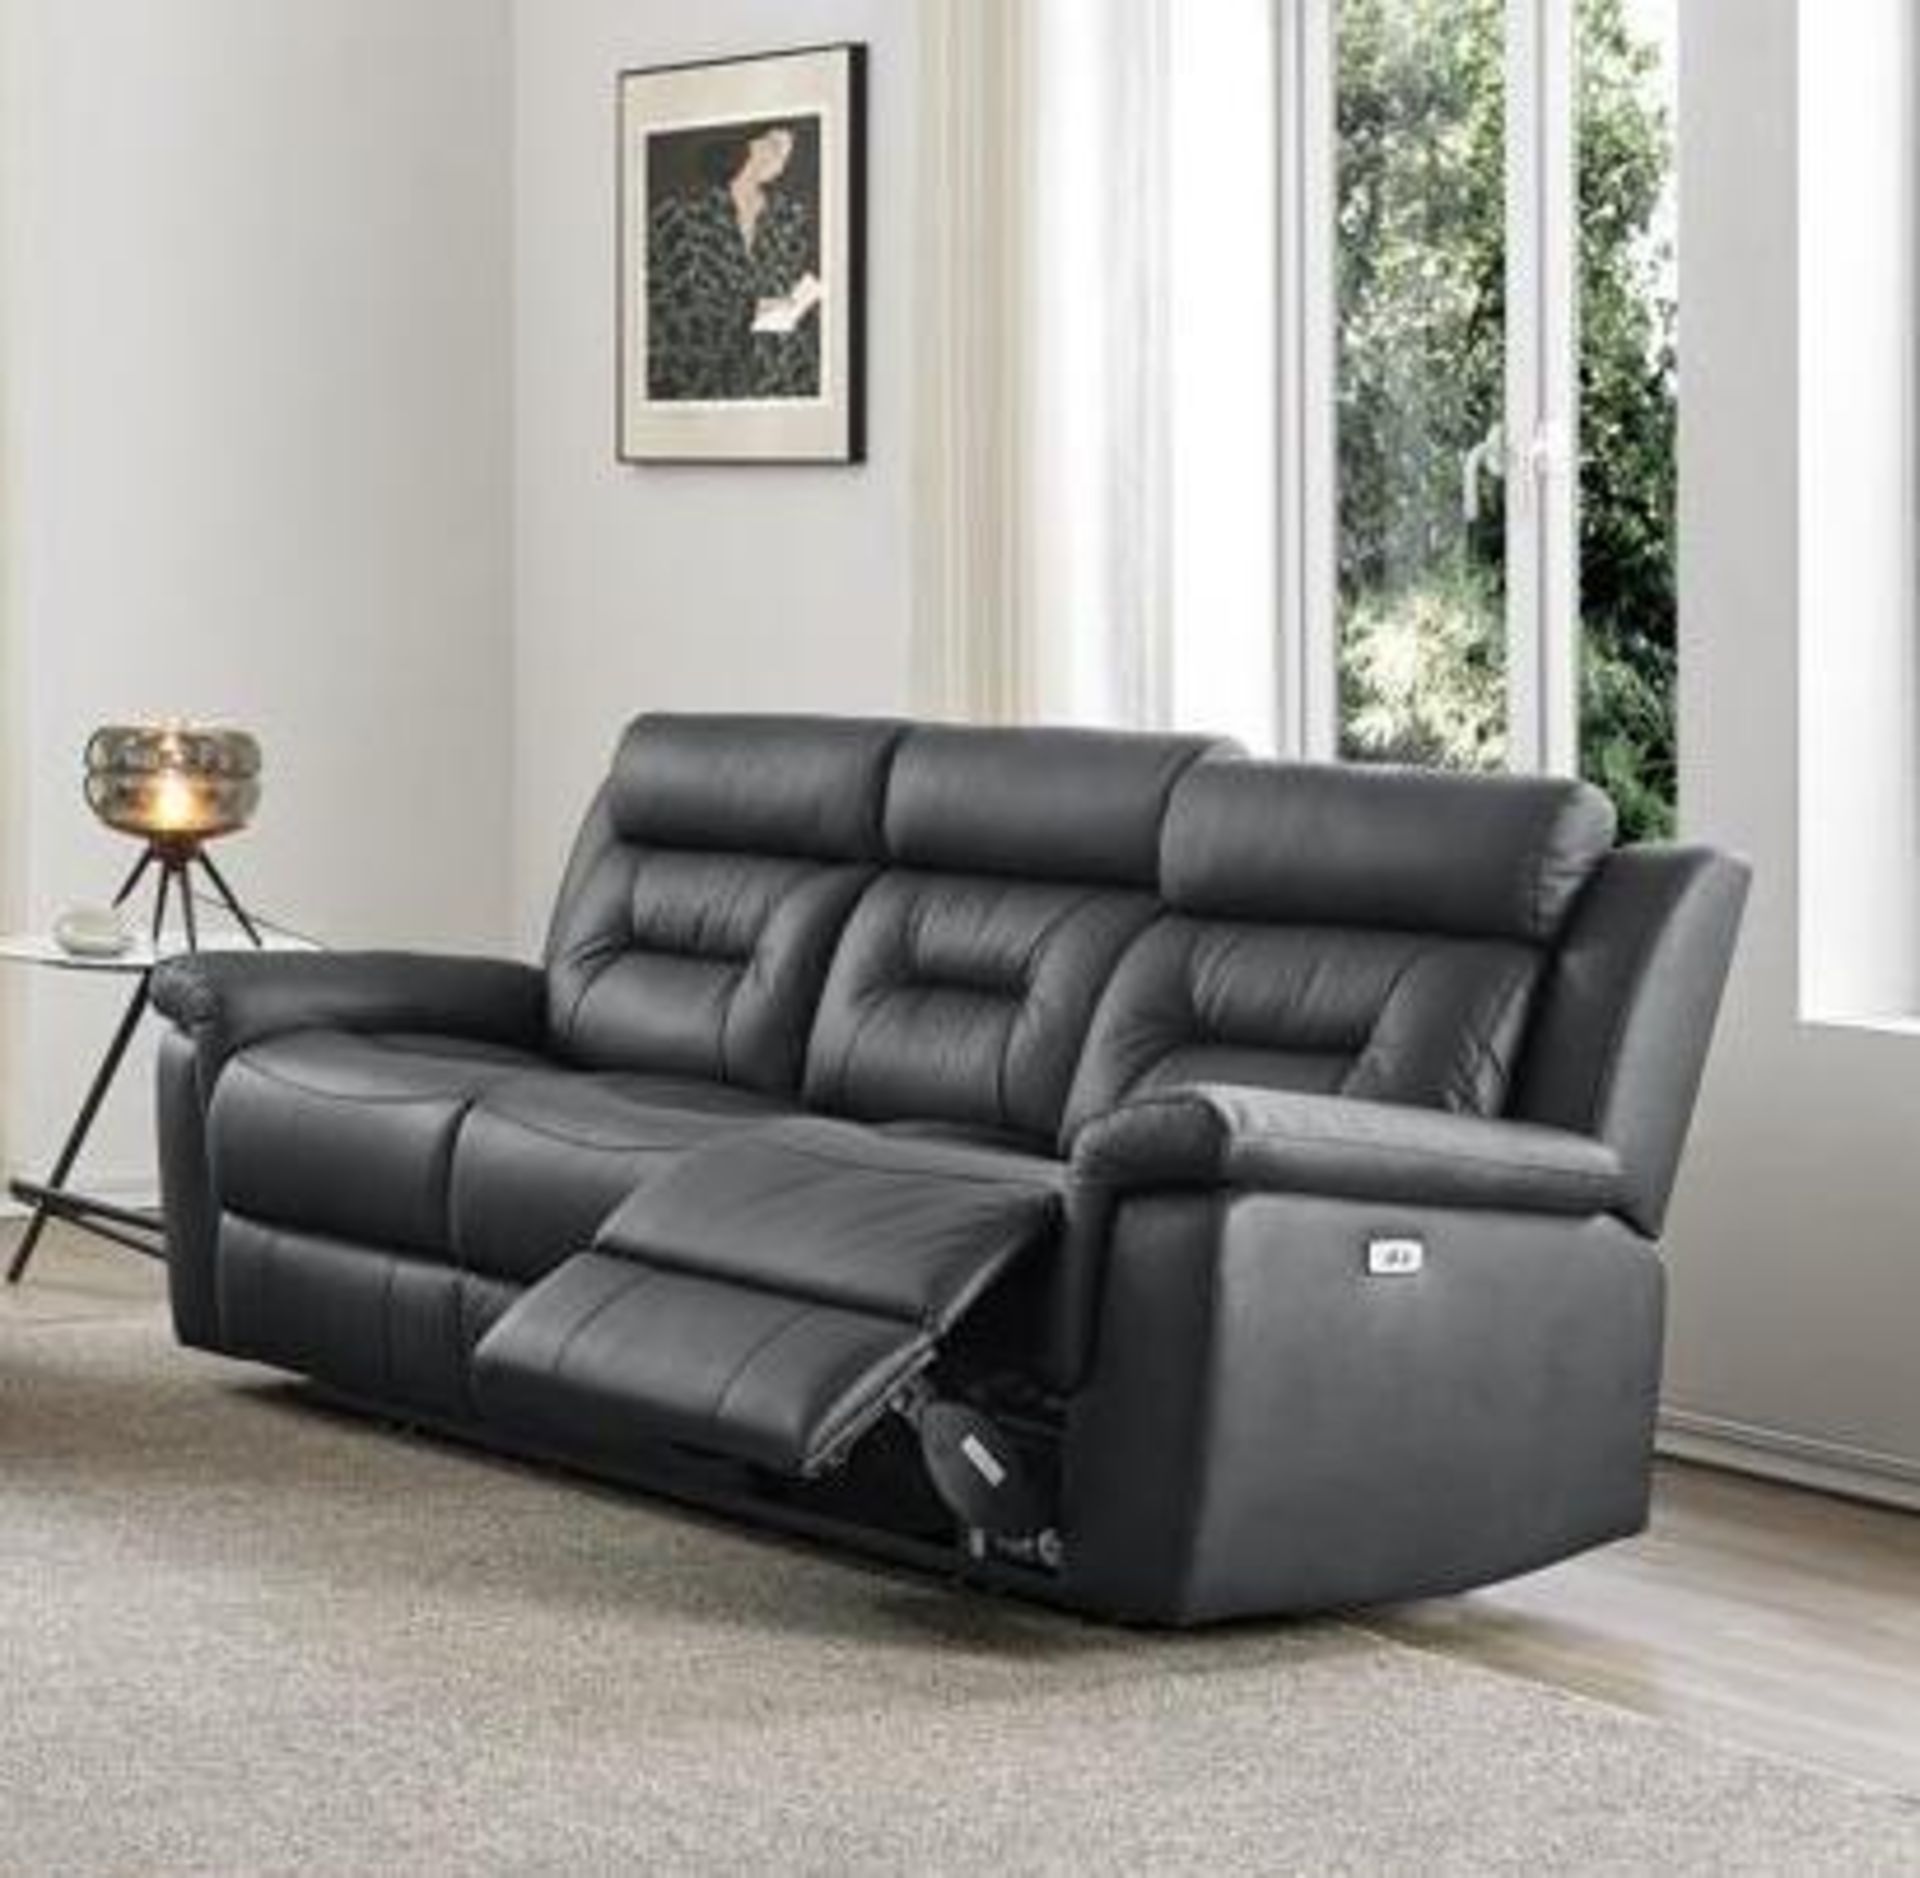 *BRAND NEW* Milano Leather Electric Recliner Collection 3 + 2 in Black. - Image 2 of 3